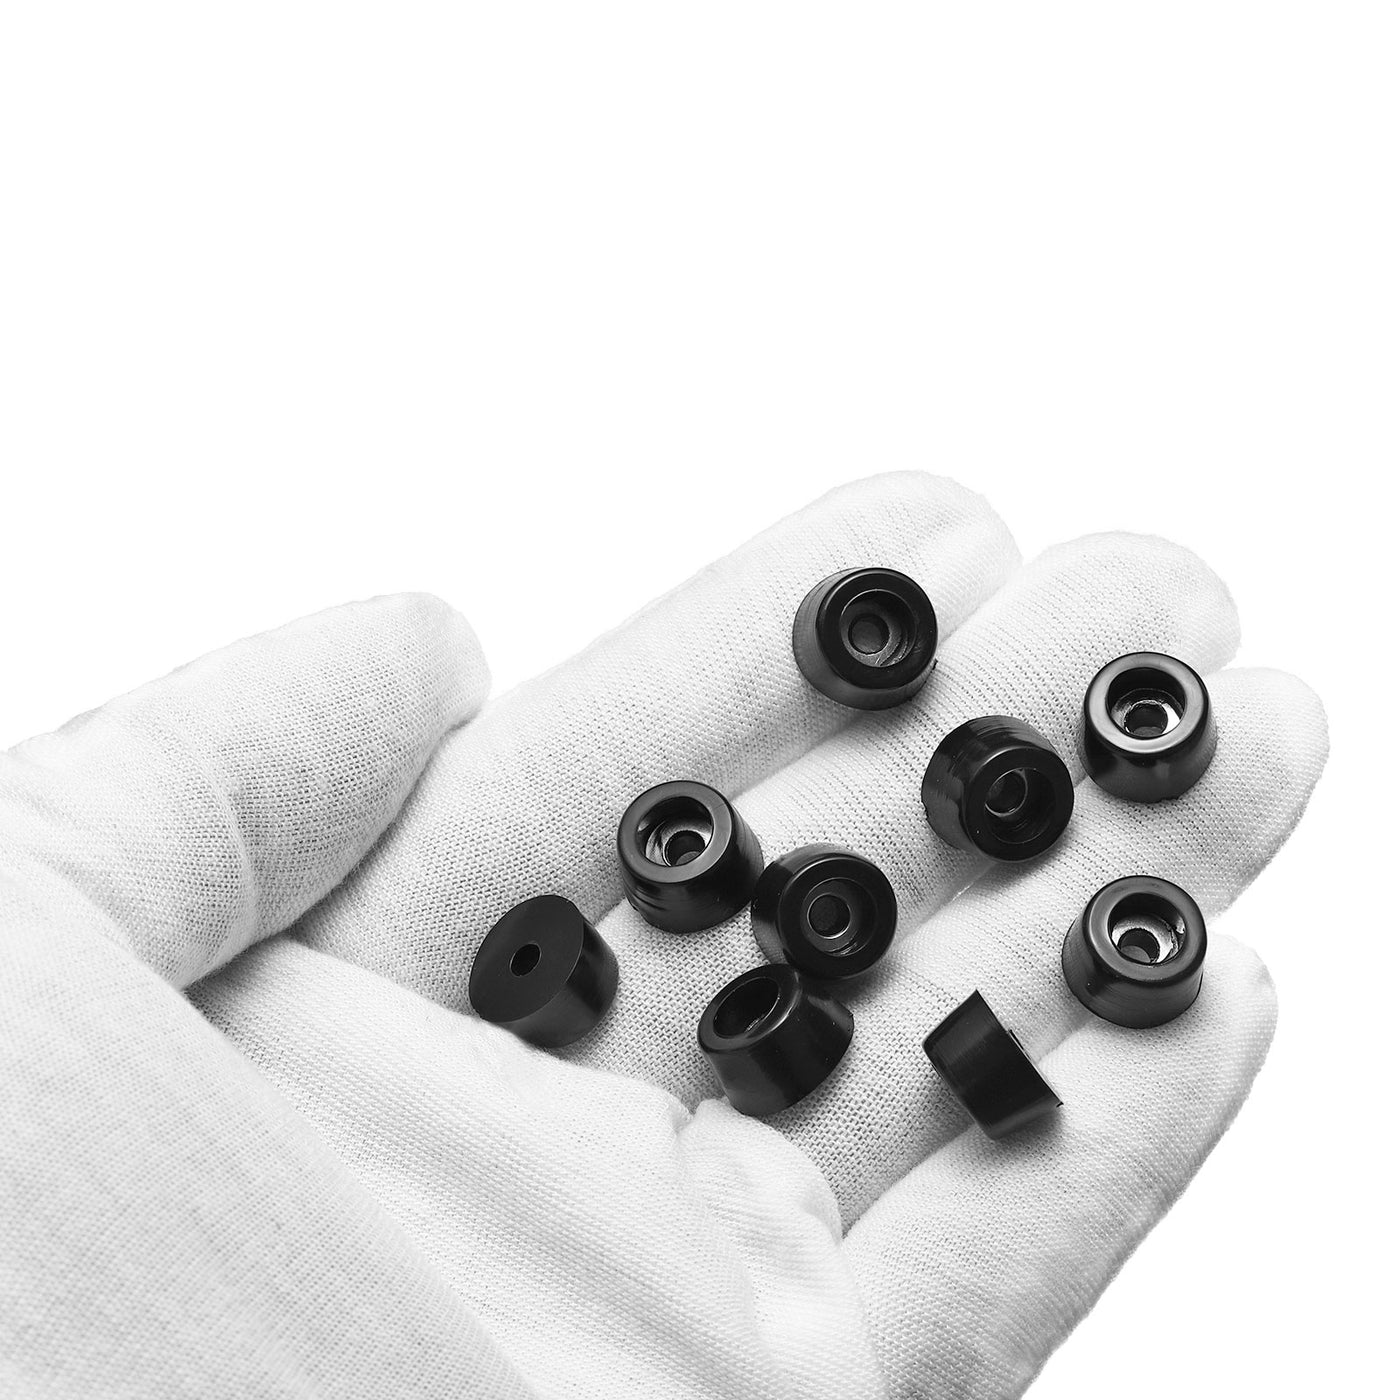 uxcell Uxcell 10Pcs Rubber Bumper Feet, 0.28" H x 0.51" W Round Pads with Stainless Steel Washer and Screws for Furniture, Appliances, Electronics